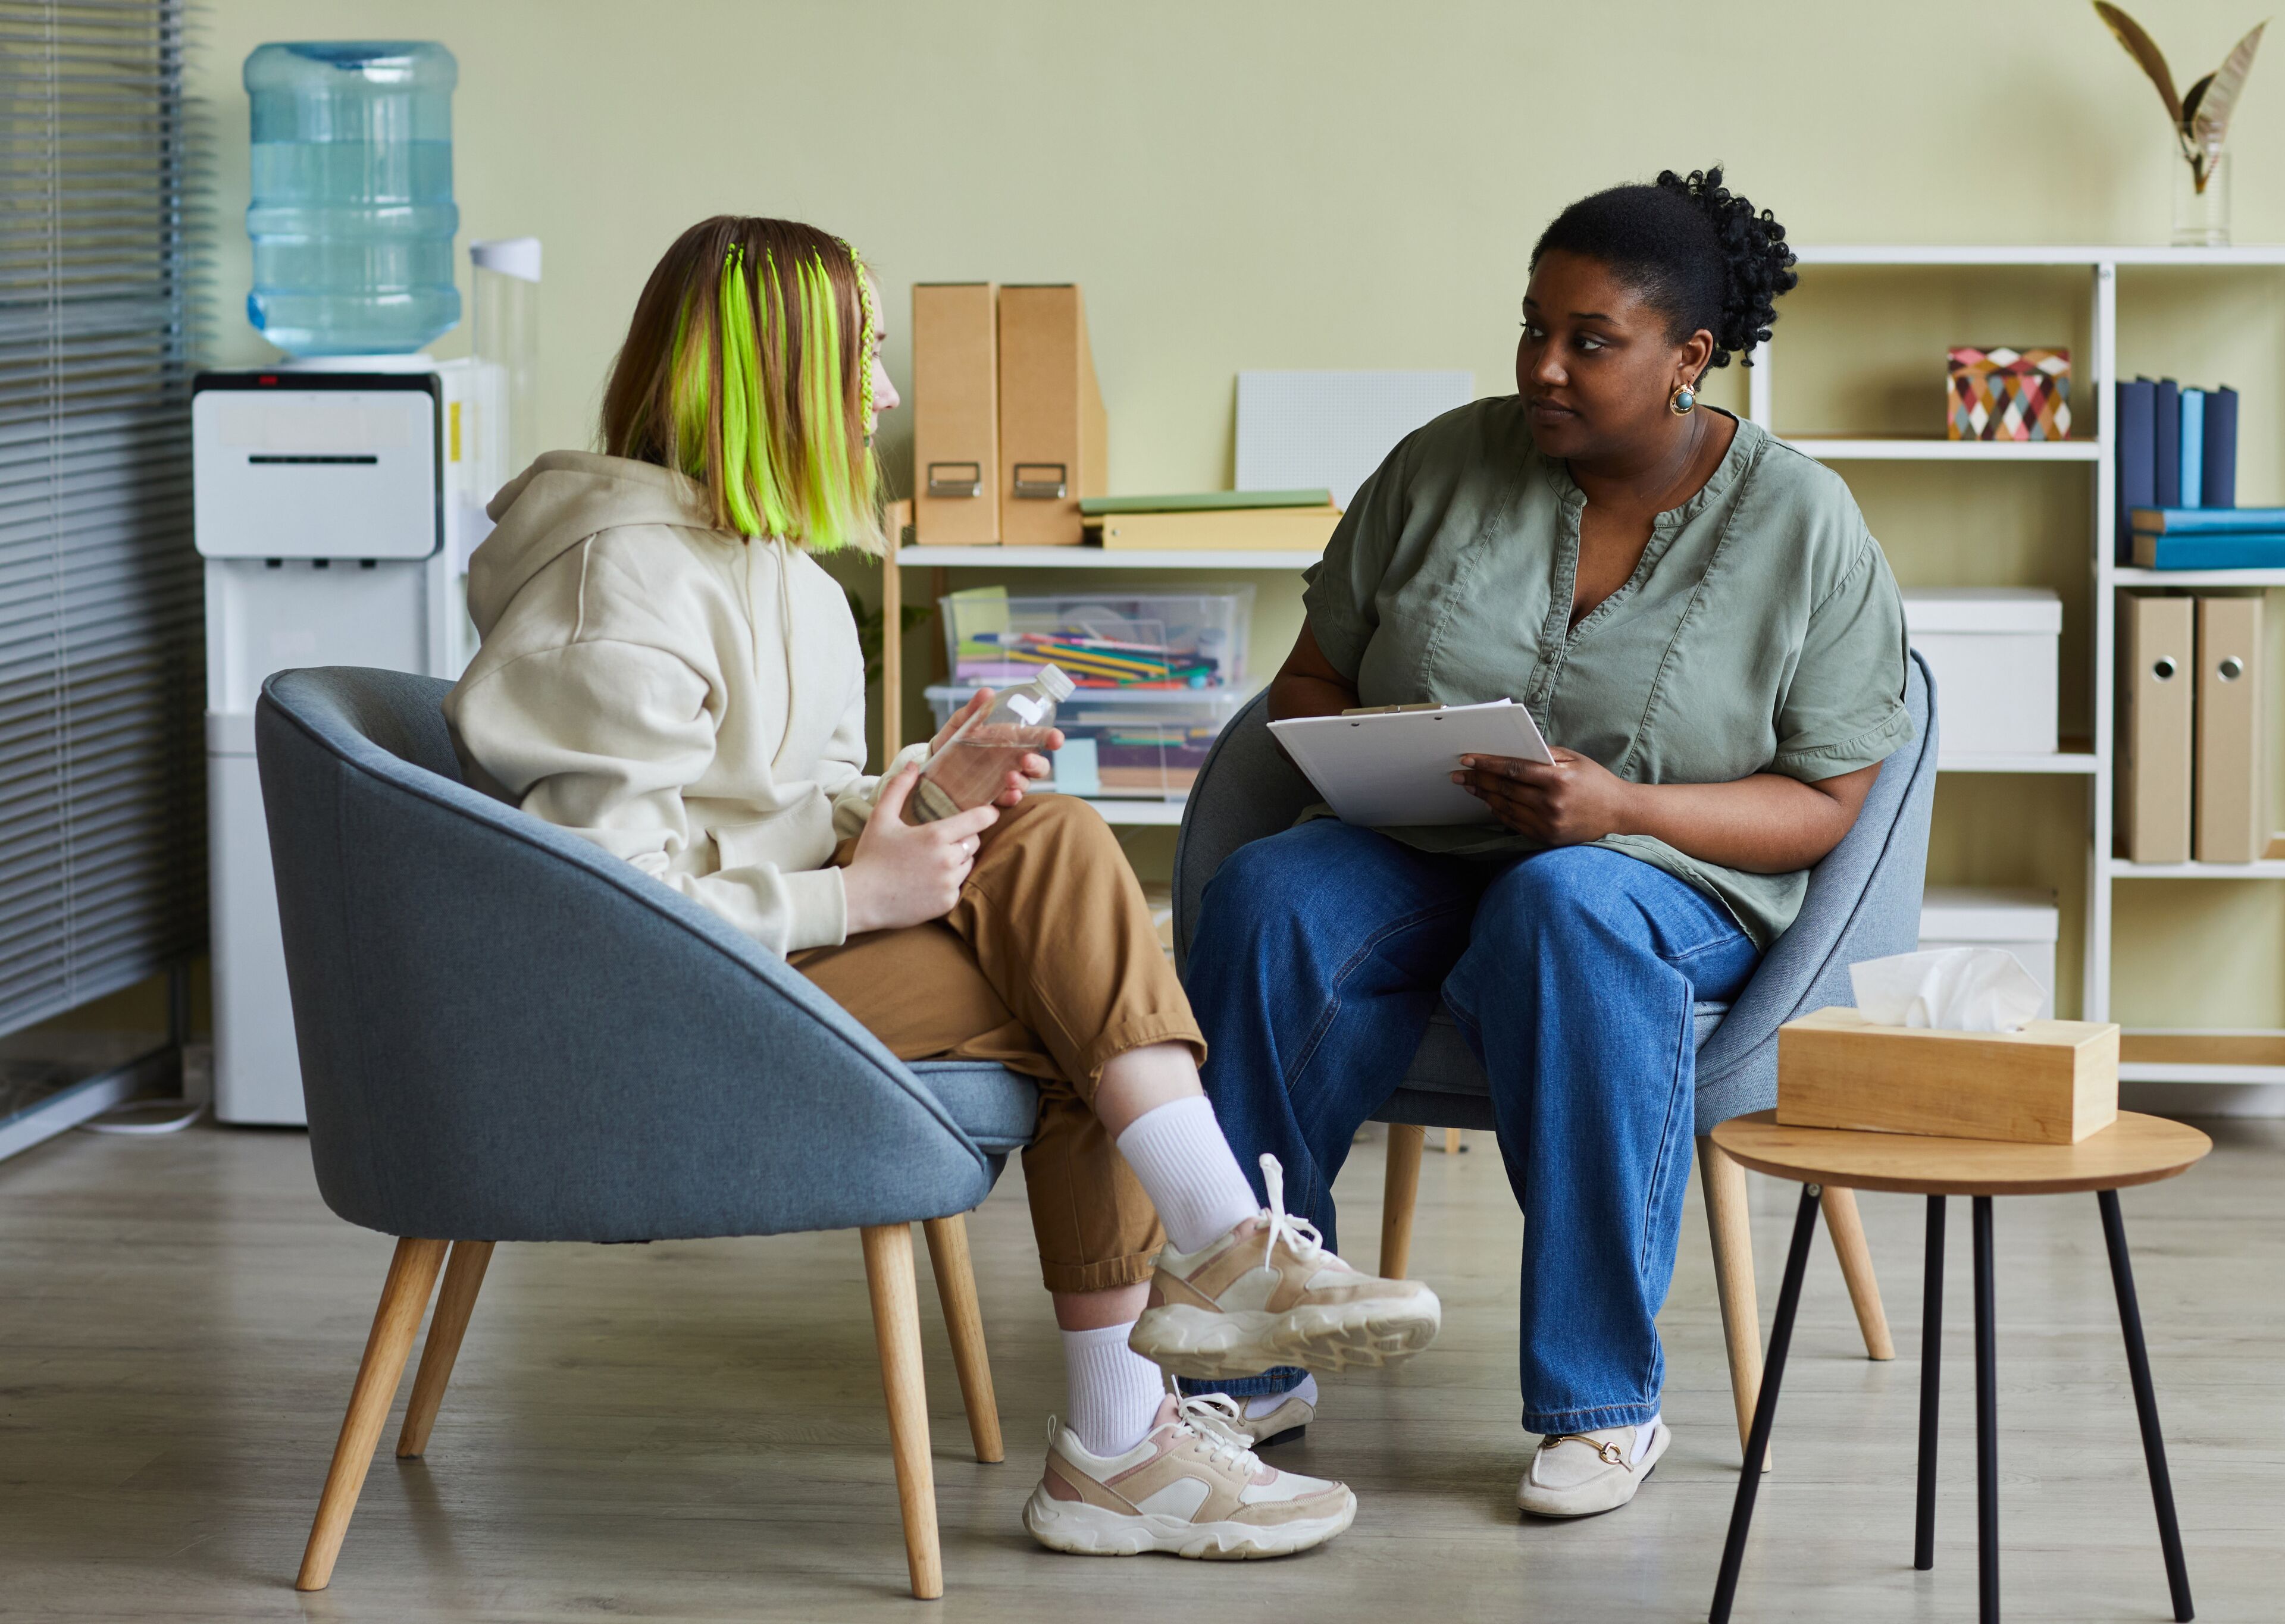 A patient with striking green hair speaks to a therapist, who is taking notes during a counseling session.